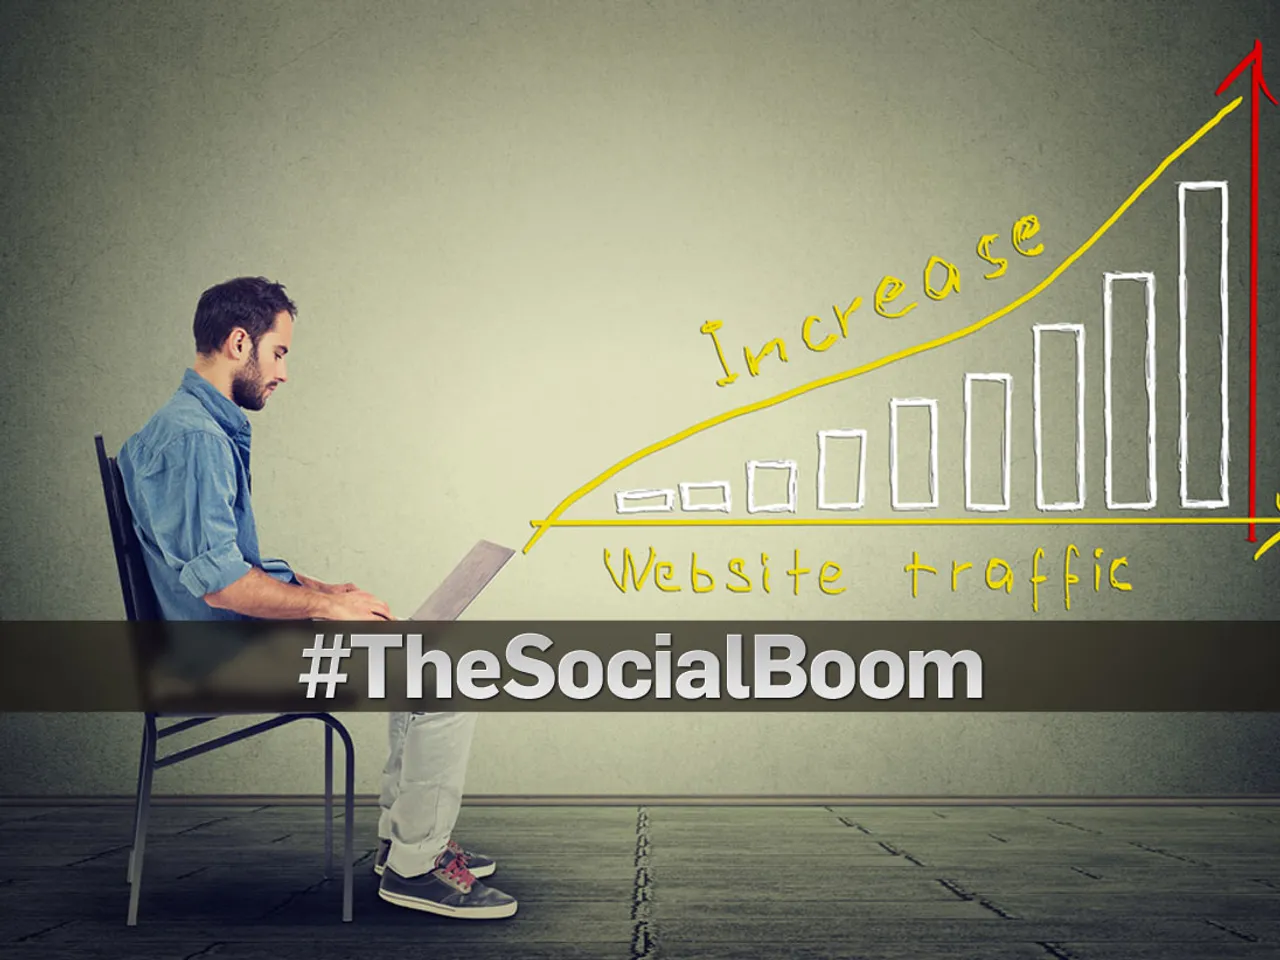 #TheSocialBoom: How to use PR and Social Media to get traffic on to your site